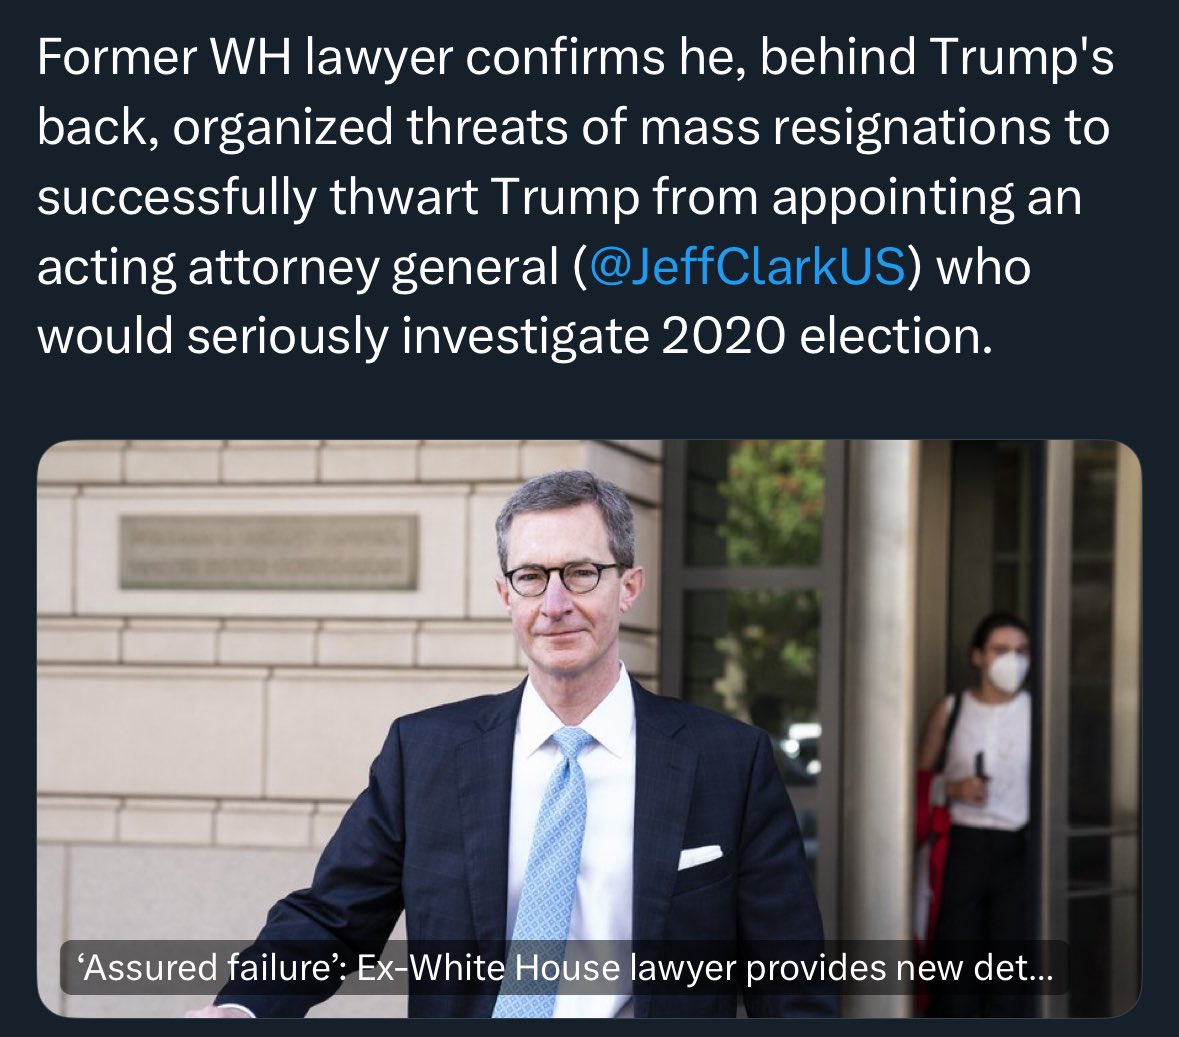 ELECTION FRAUD: Trump’s White House lawyer admitted to engineering a plan, with the help of top DOJ officials, to prevent any investigation into 2020 election fraud. The DOJ never investigated any of the incidents witnessed by the GOP and the courts cooperated.